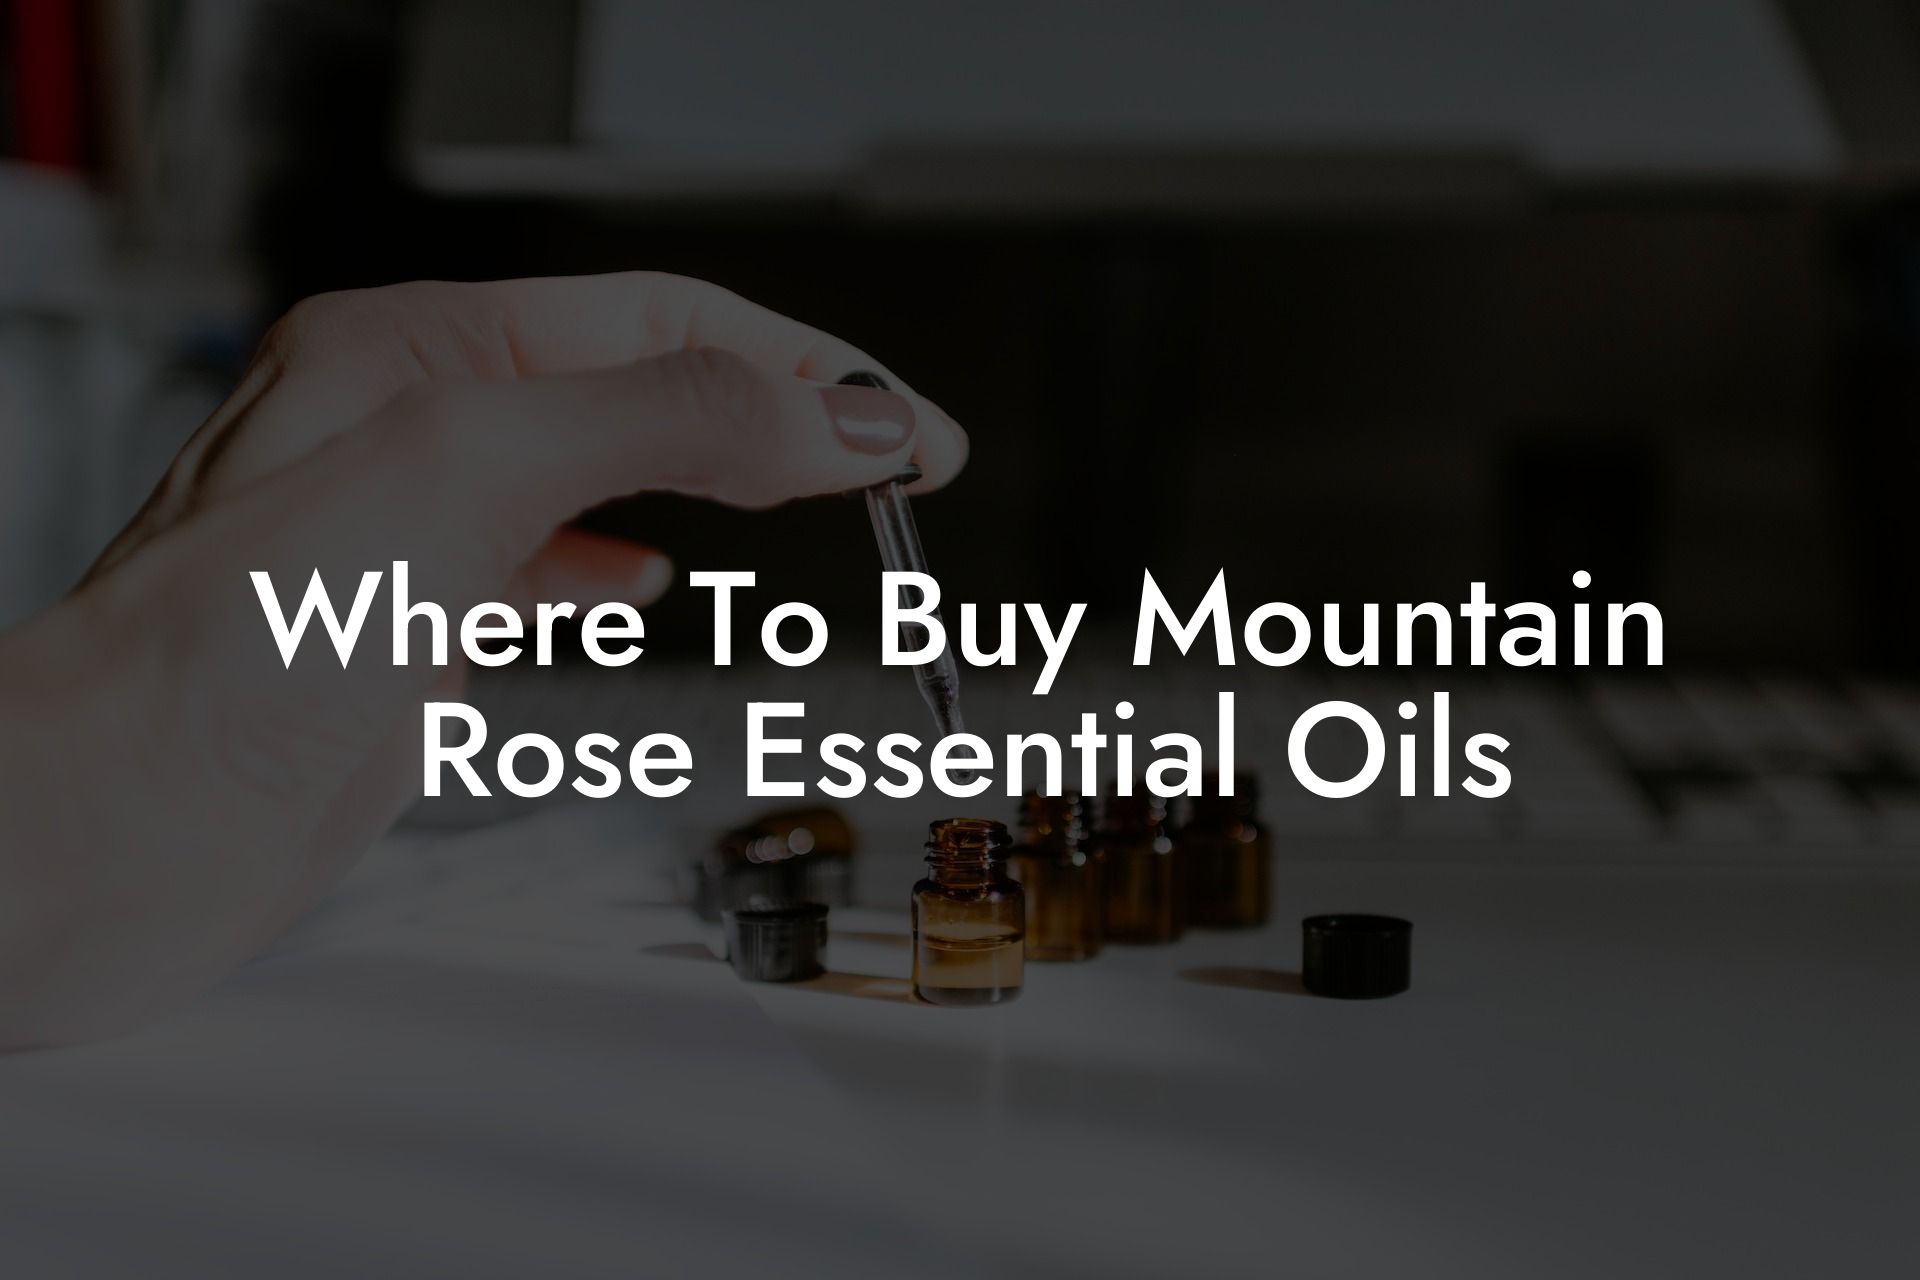 Where To Buy Mountain Rose Essential Oils